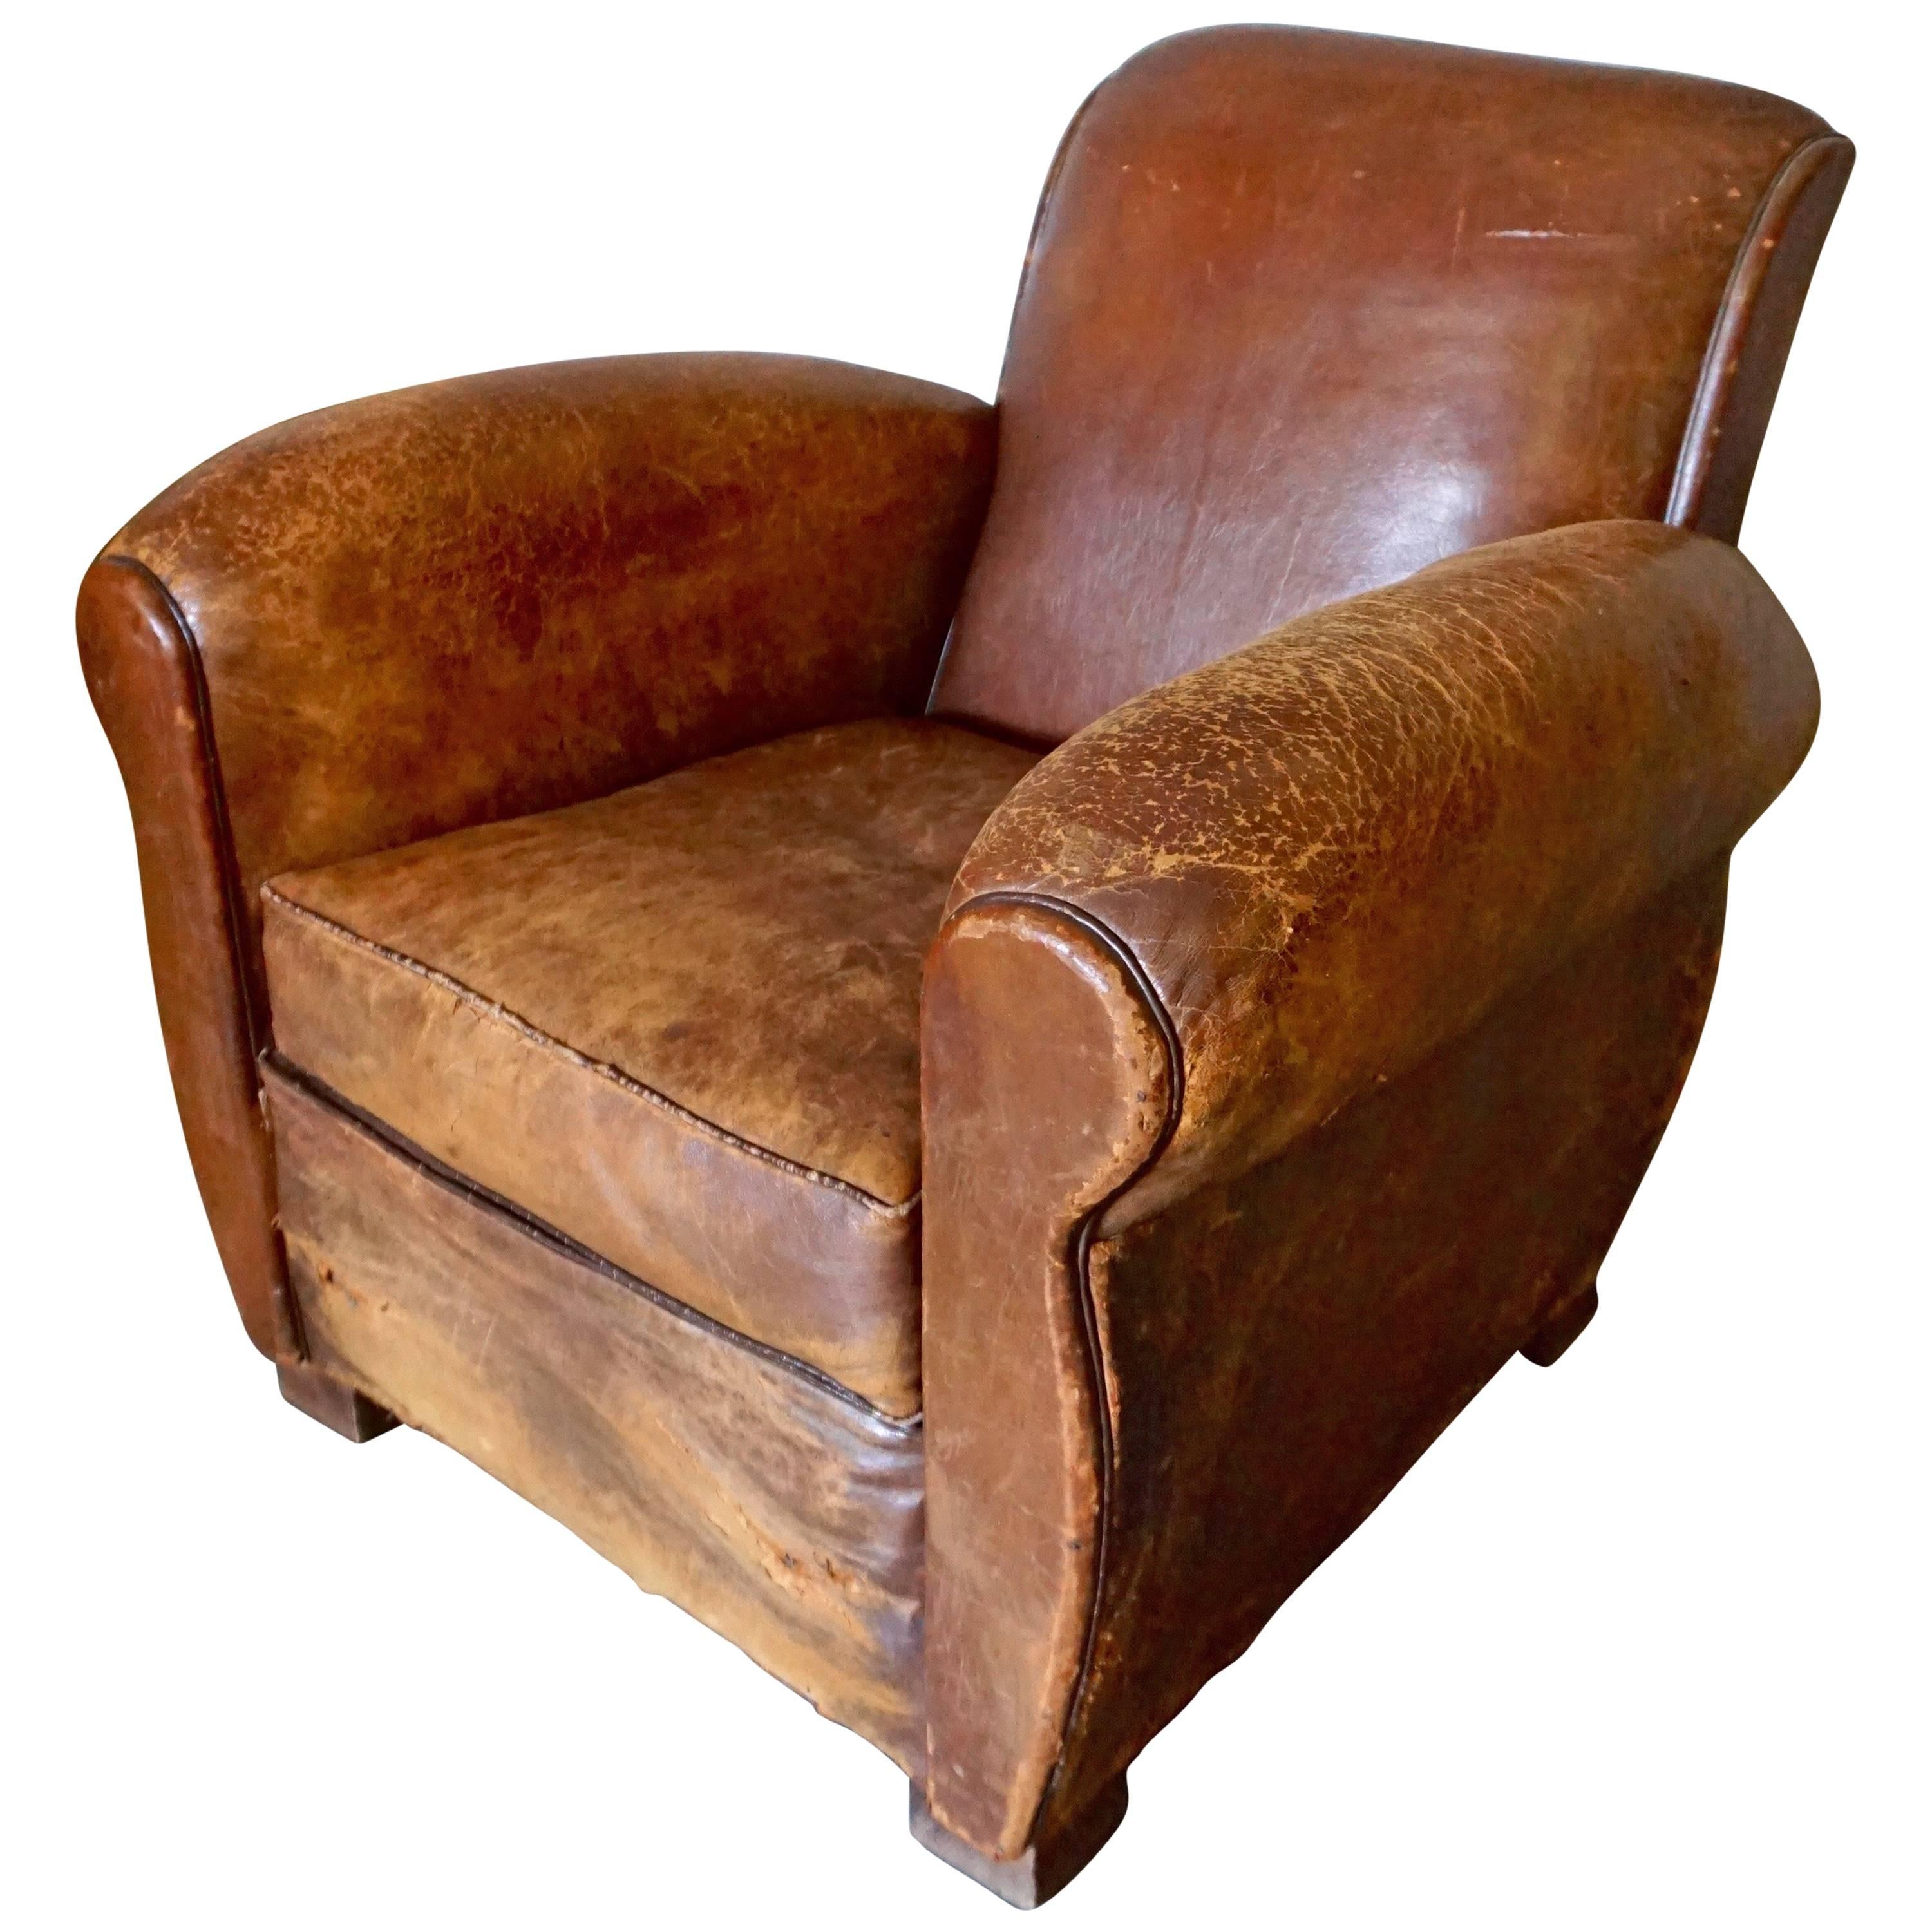 Distressed Art Deco French Cognac Leather Club Chair, 1930s